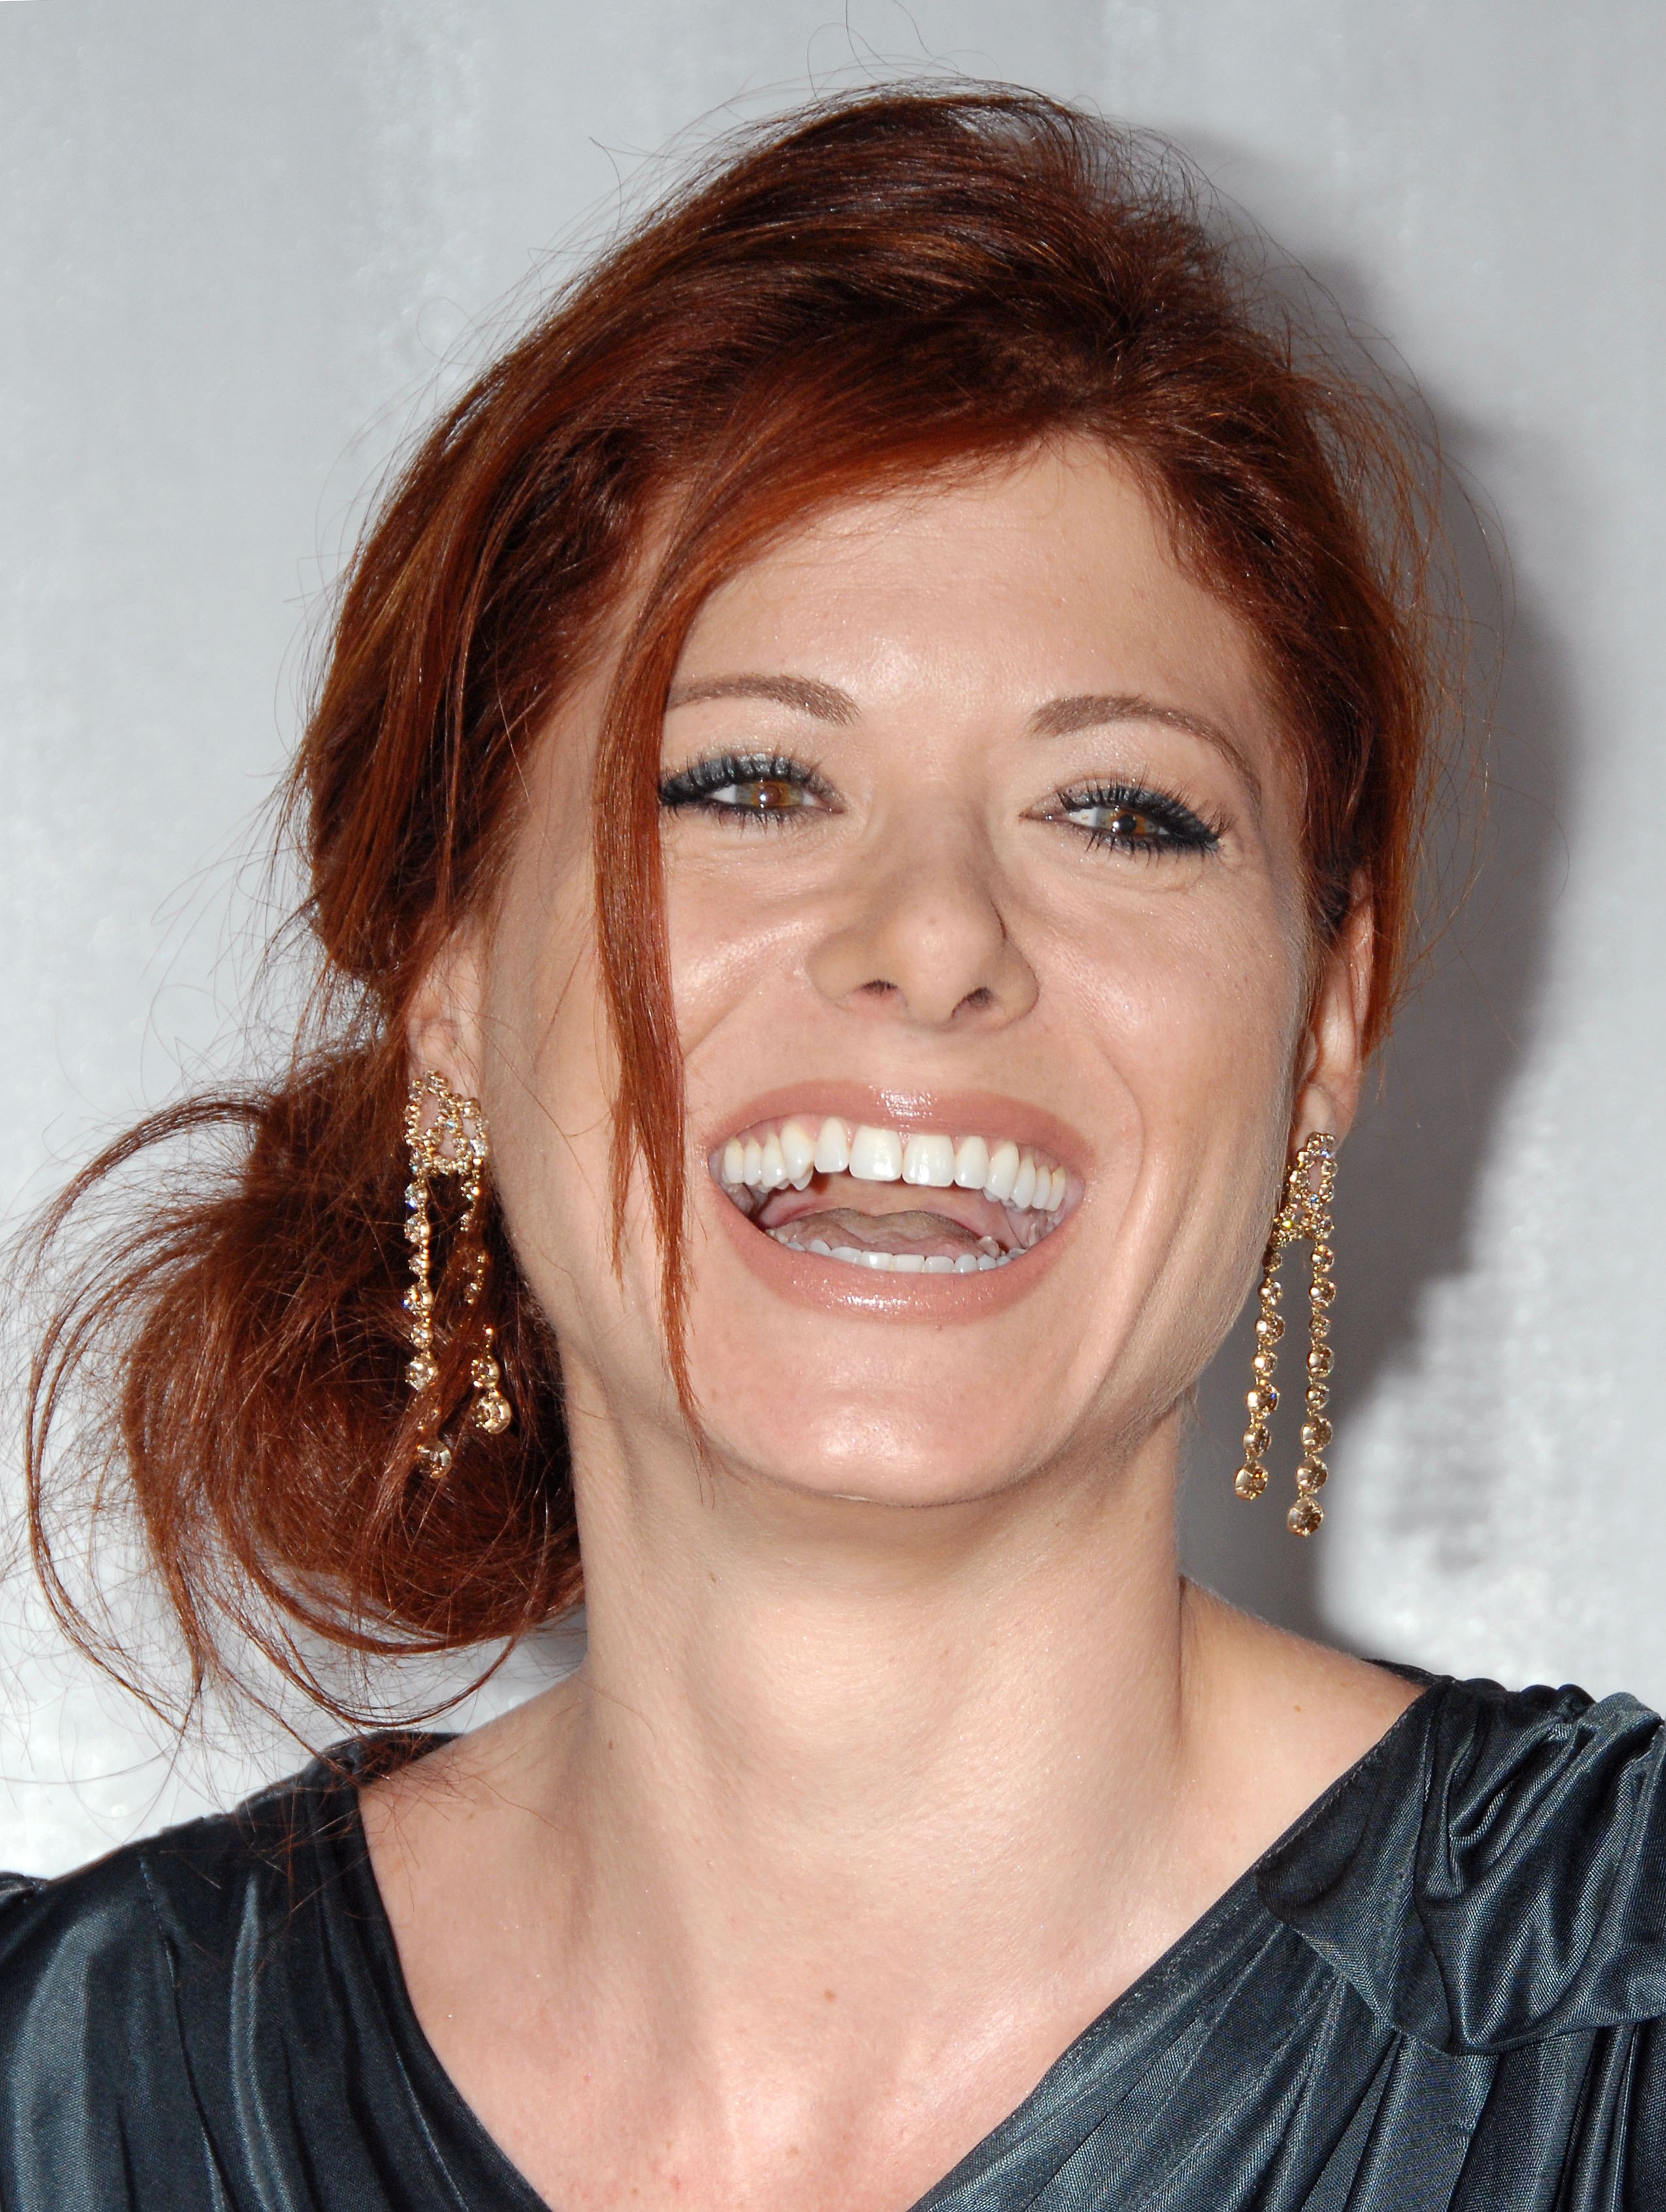 Pictures of Debra Messing - Pictures Of Celebrities2550 x 3385